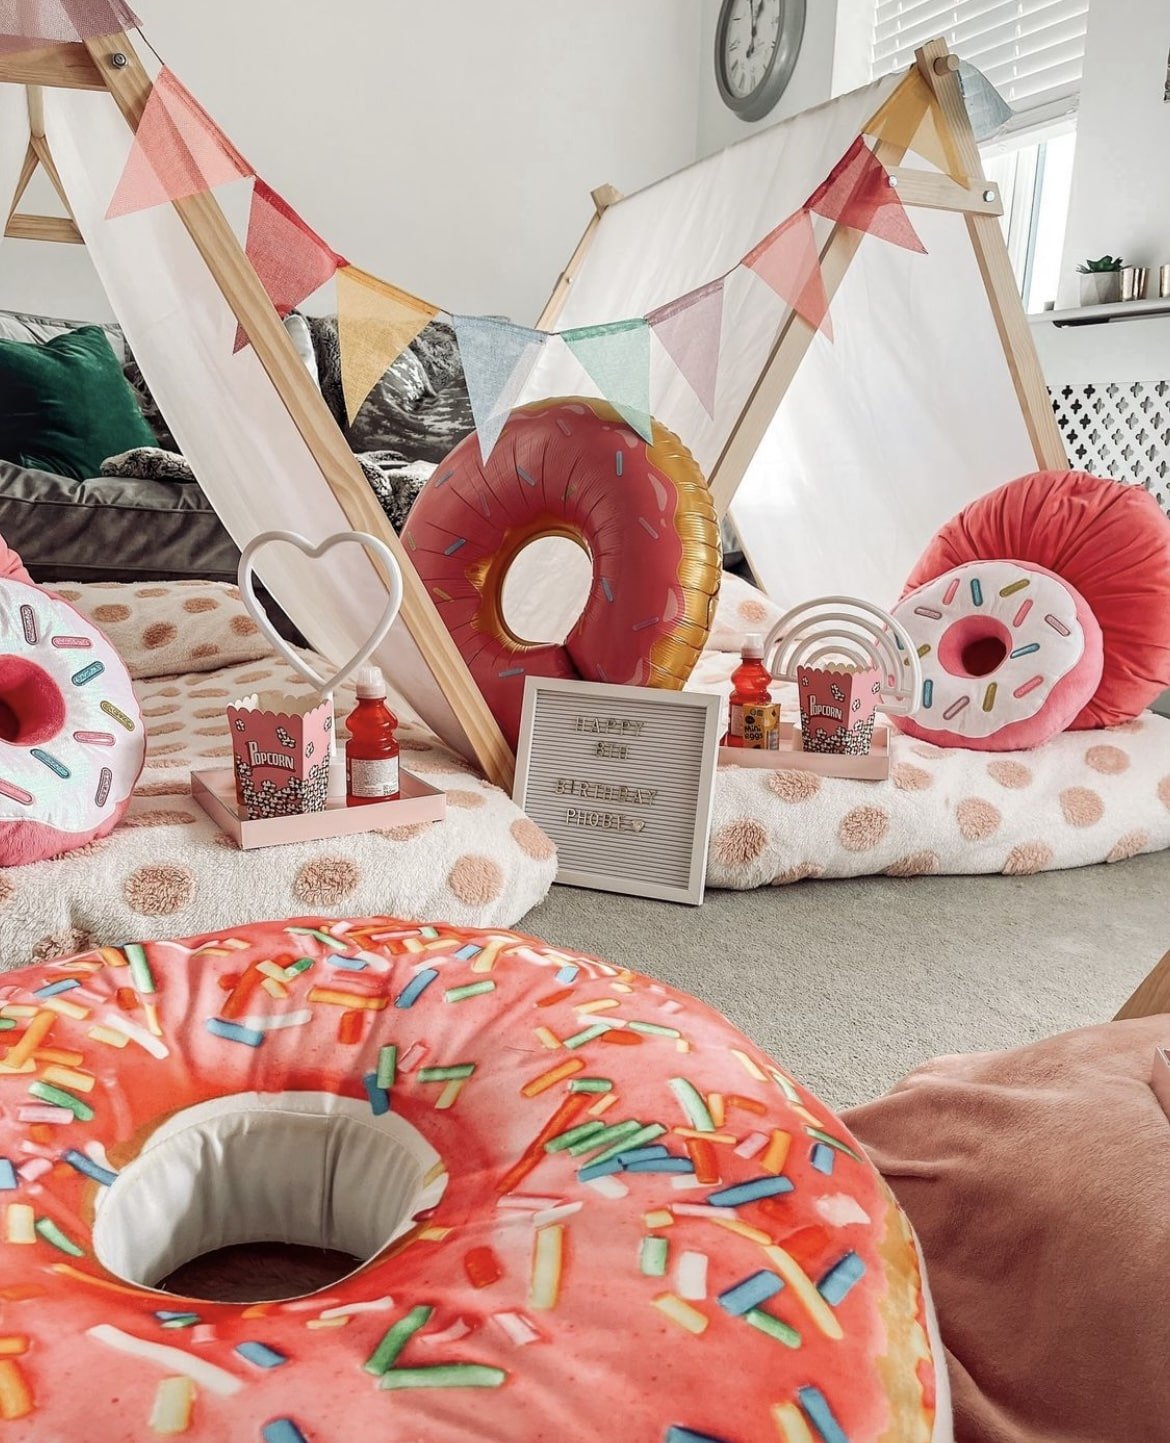 Raffles Boutique Hire - Sleepover Party Tents in Bedfordshire